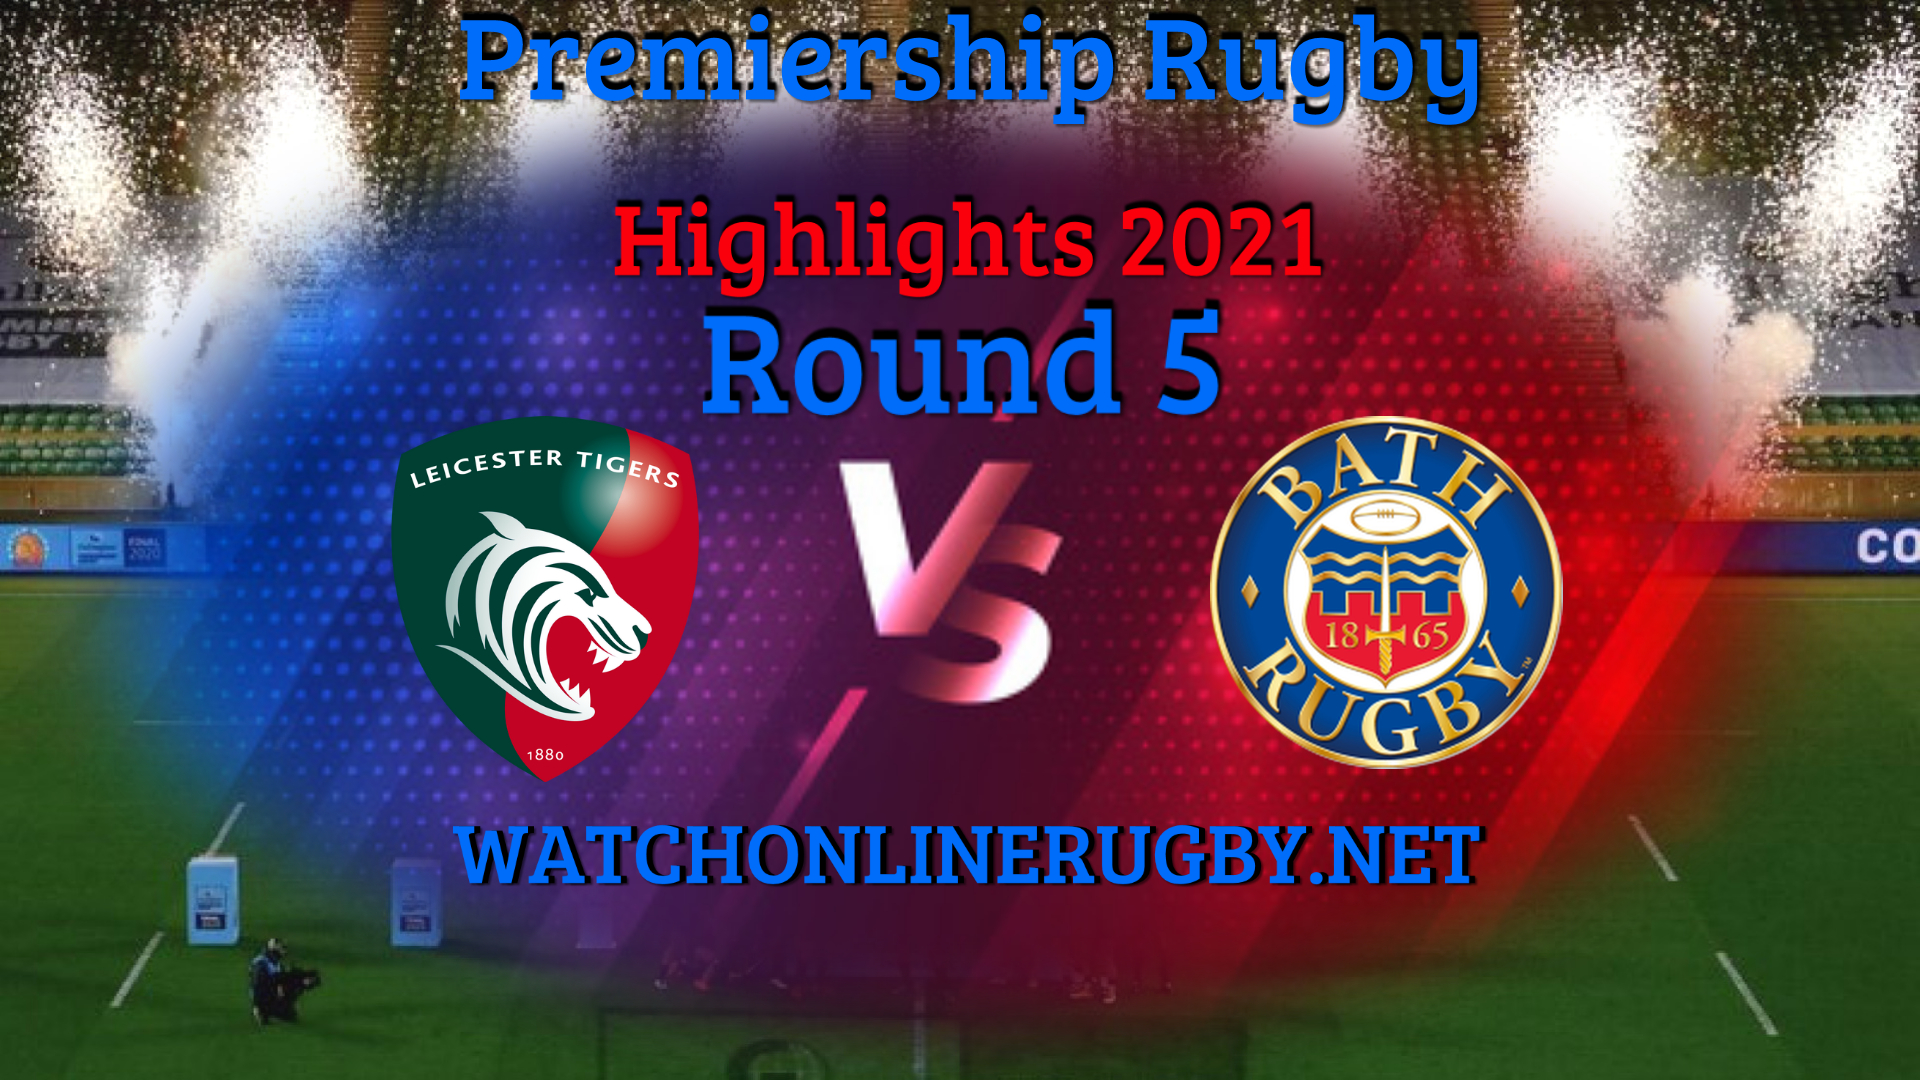 Leicester Tigers VS Bath Rugby Premiership Rugby 2021 RD 5